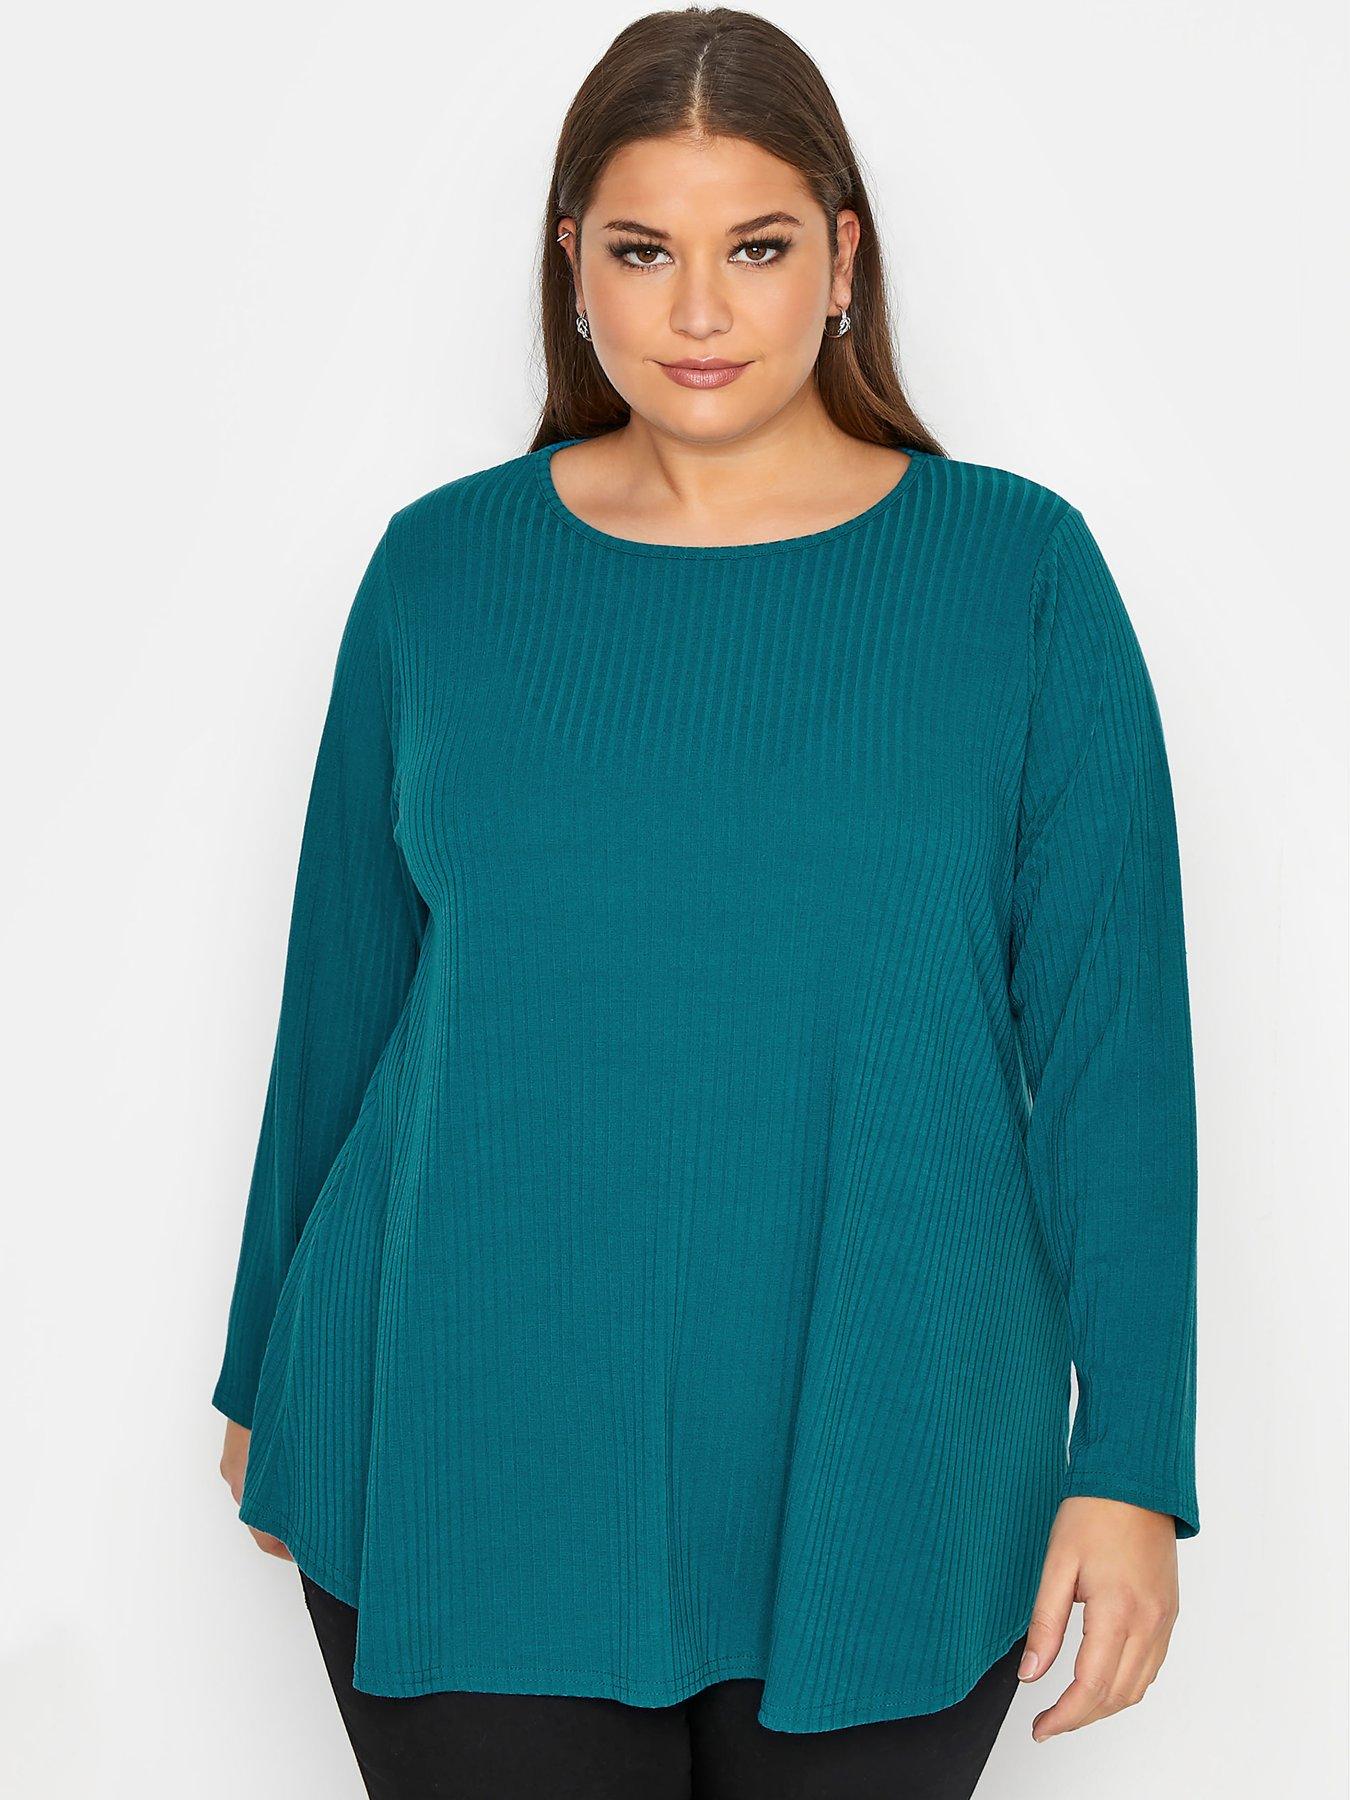 Women Yours Limited Collection Long Sleeve Rib Top - Teal